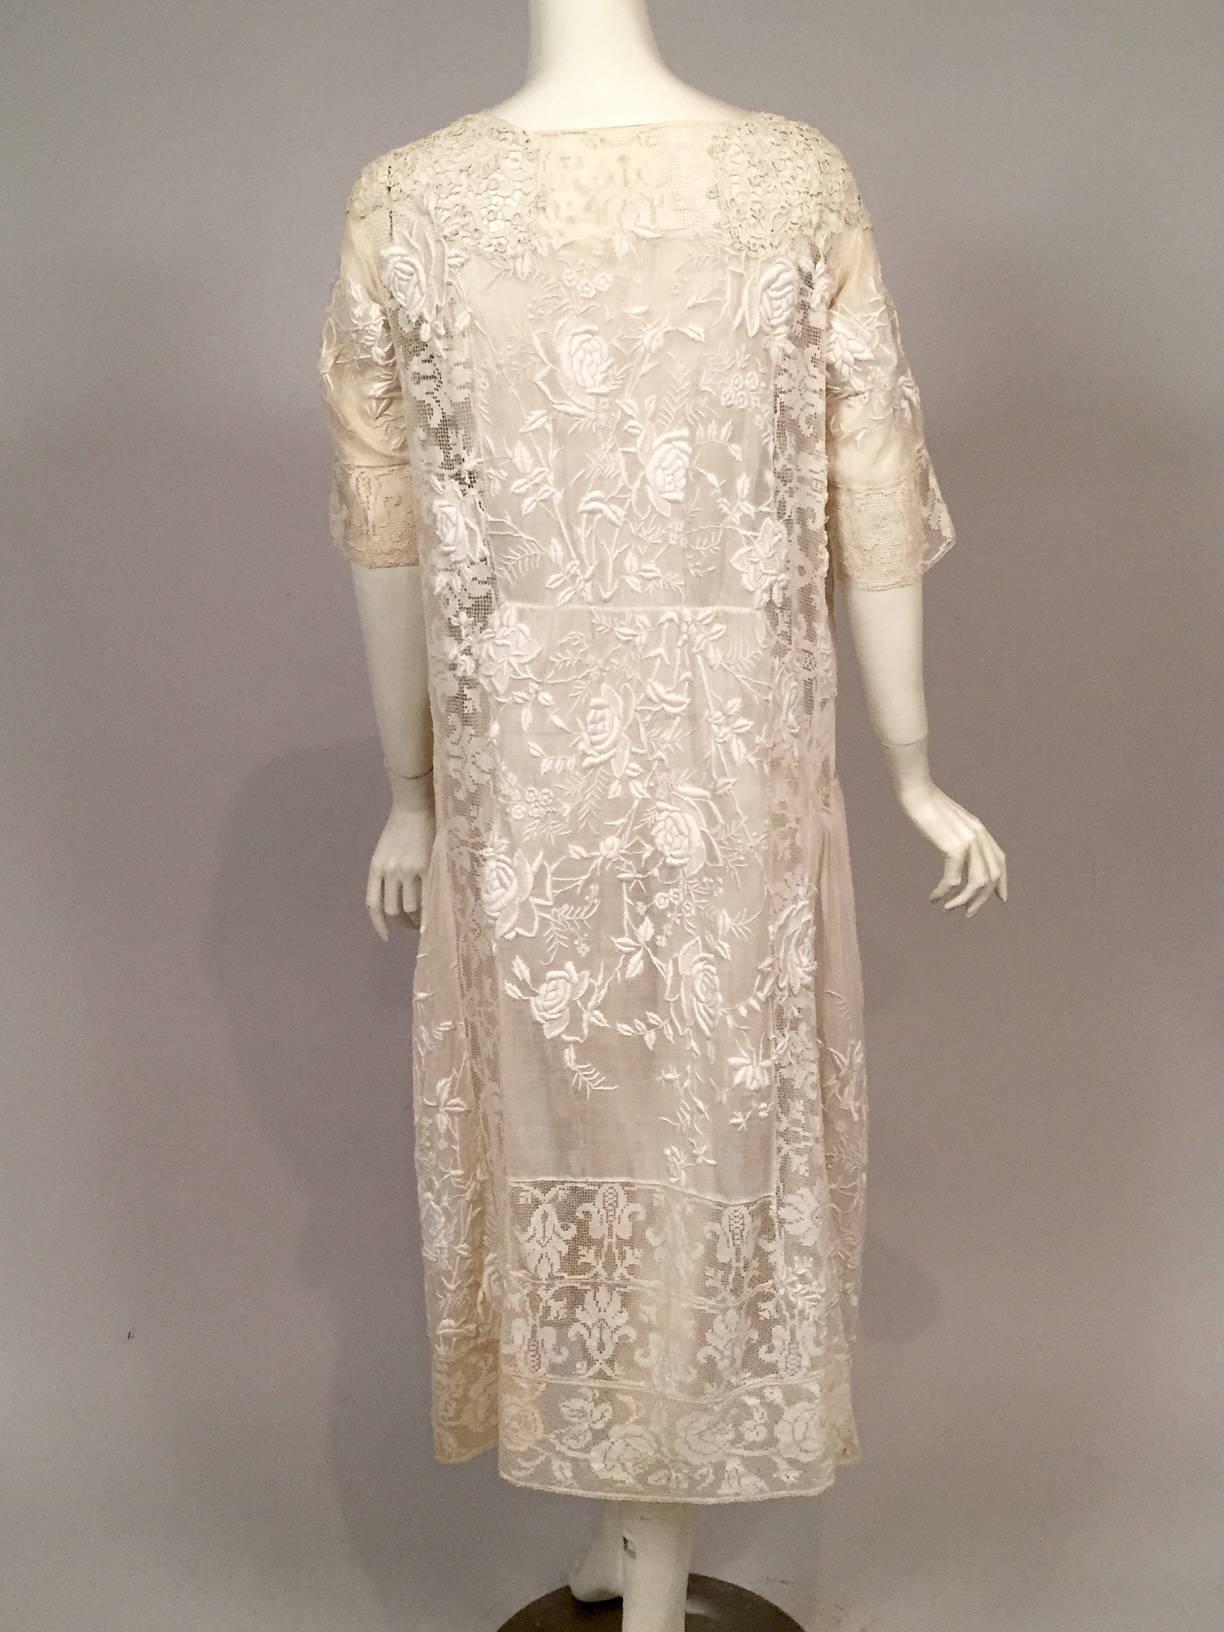 1920's Hand Made Mixed Lace and Embroidered Dress Rare Larger Size 2